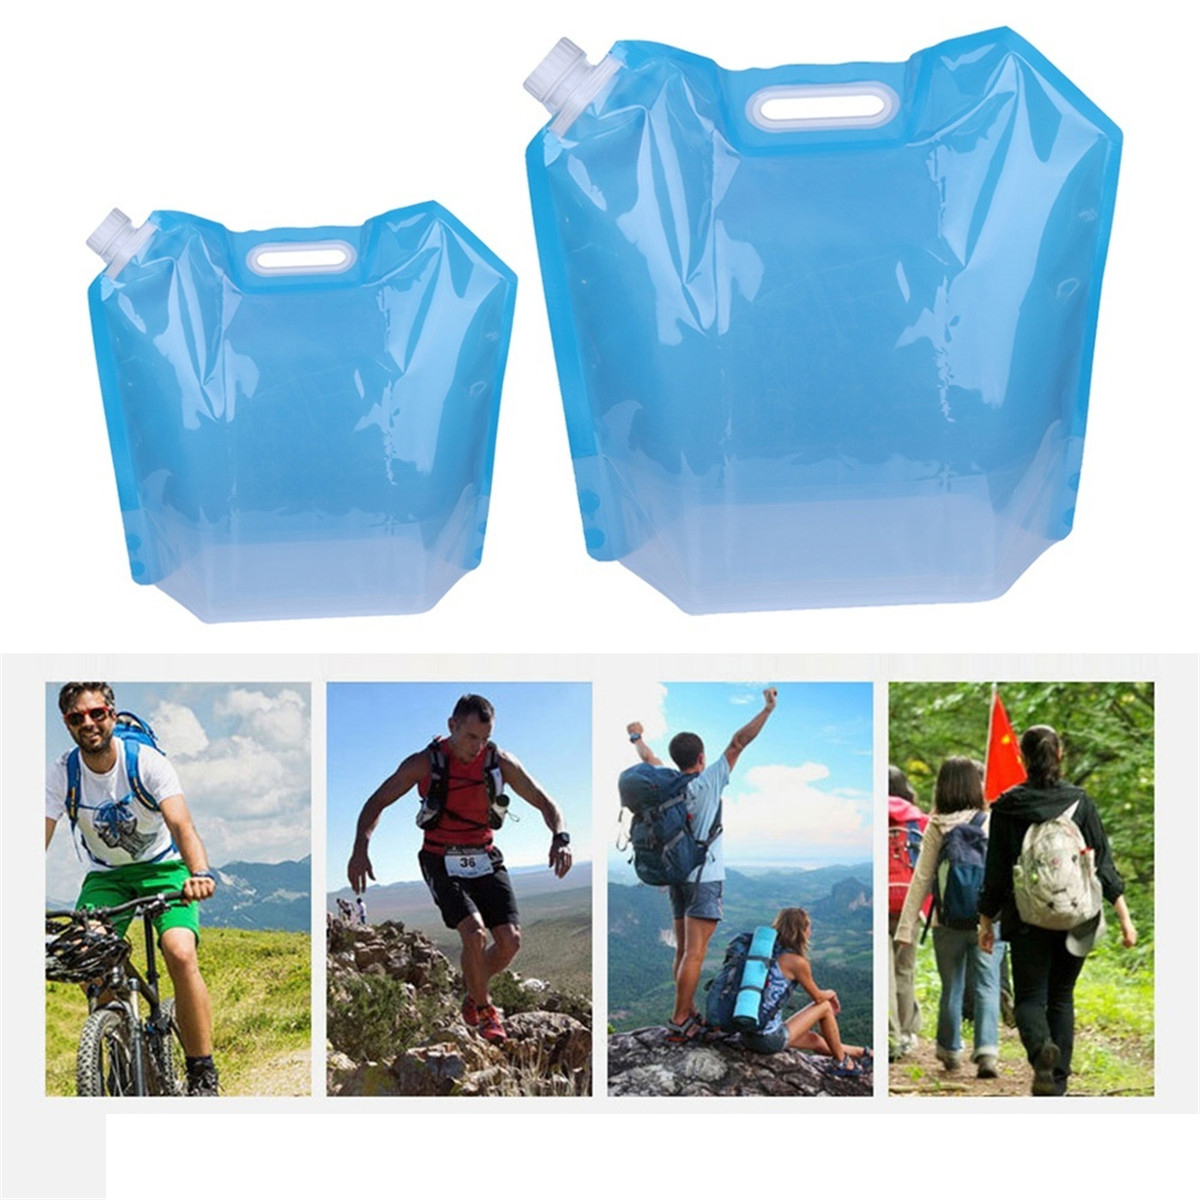 5L/10L Portable PVC Eco-friendly Foldable Water Storage Bag Outdoor Camping Traveling Water Bucket от Banggood WW